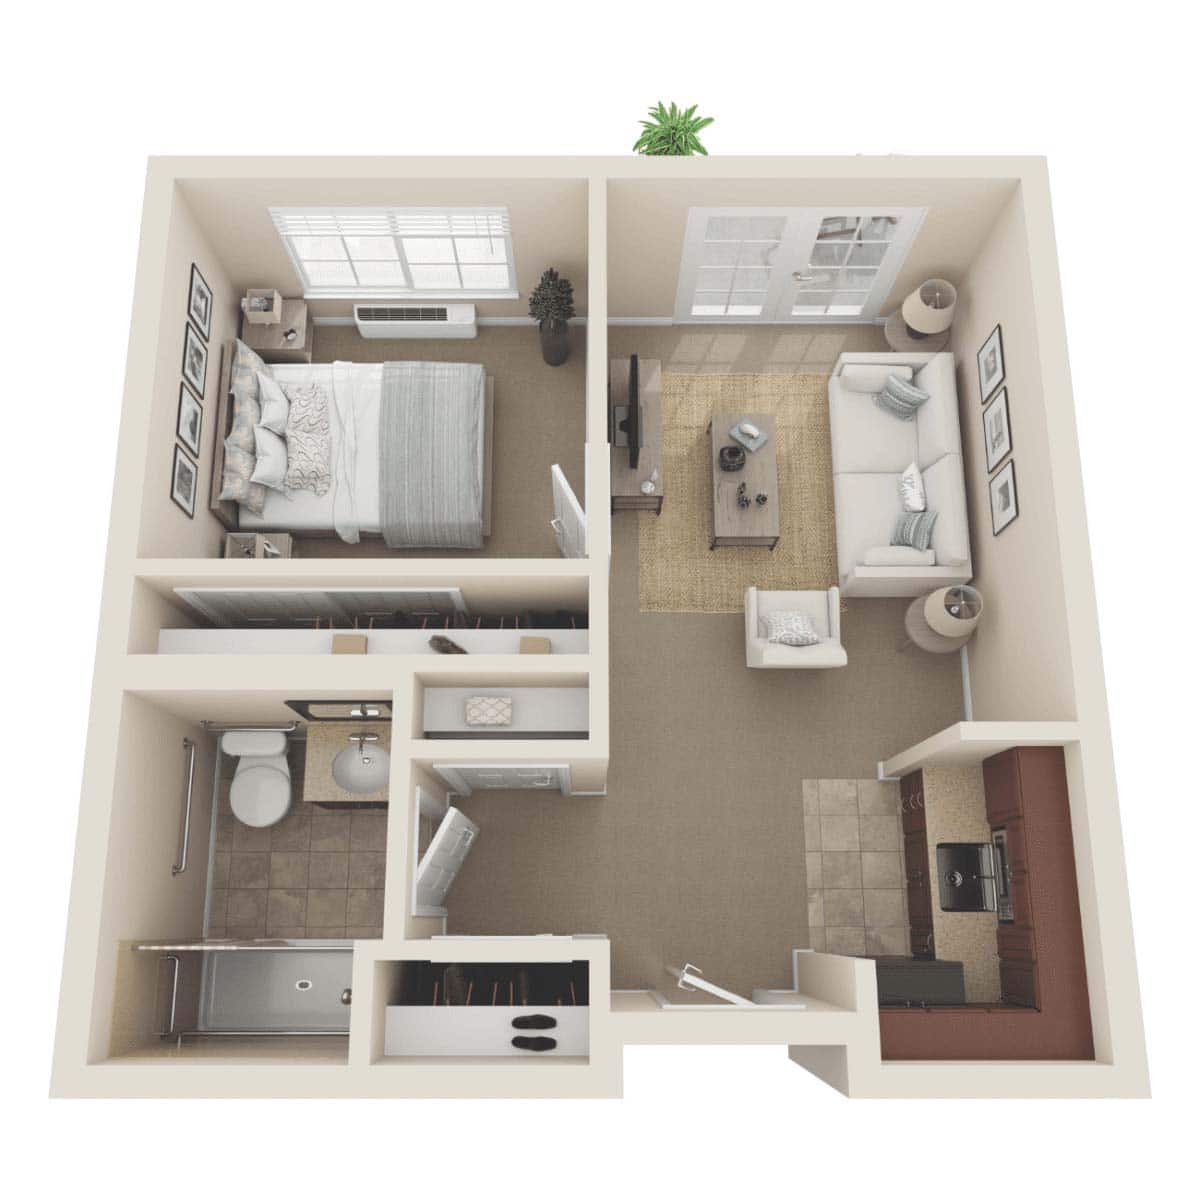 Capitol Hill Assisted Living & Memory Care - One Bedroom Floor Plan